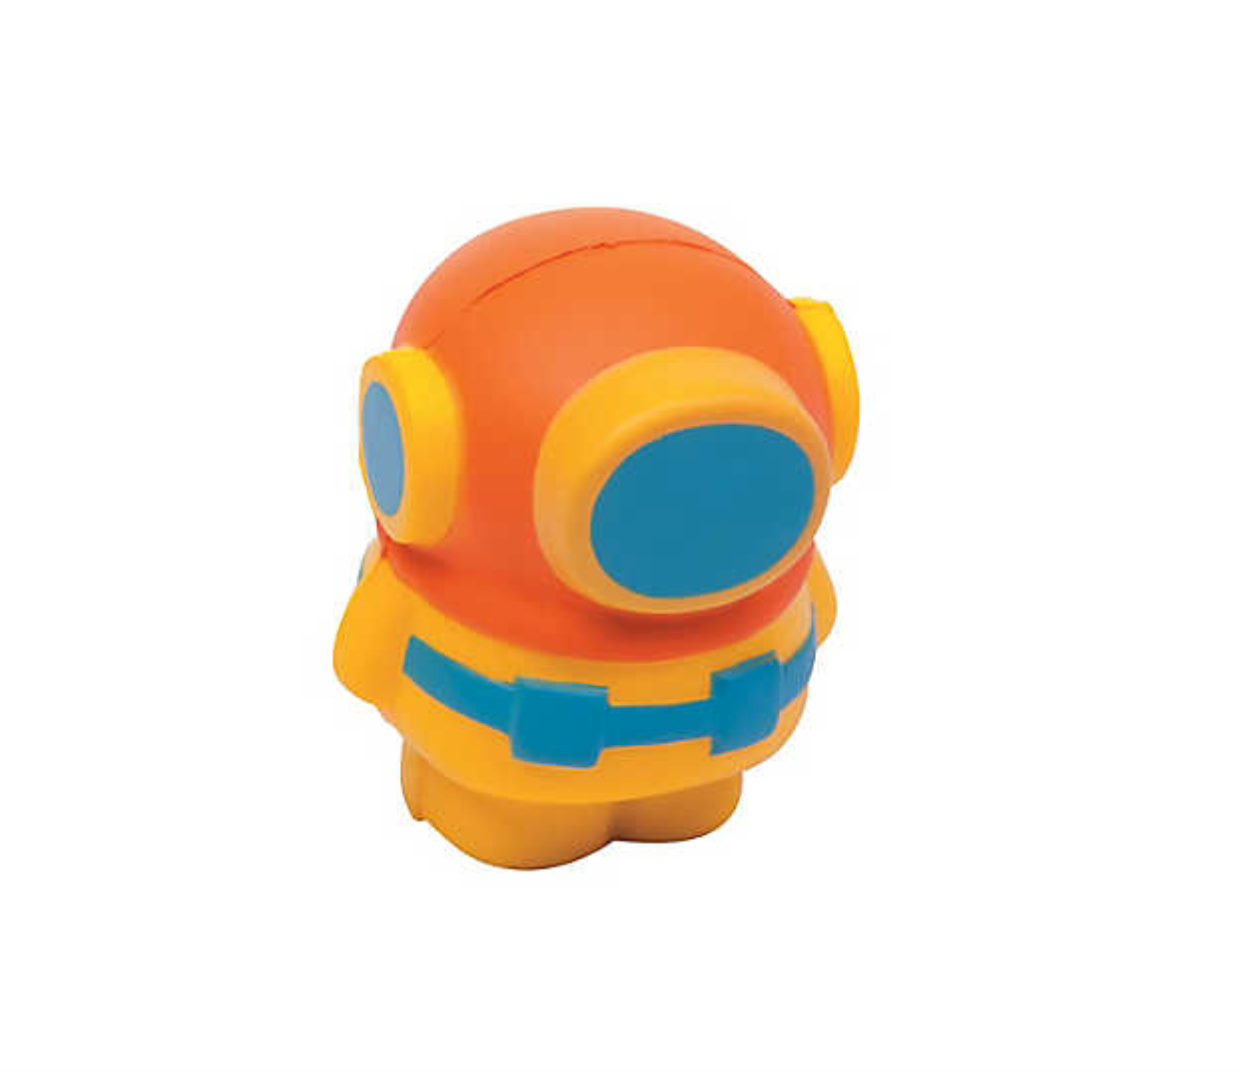 Naval Diver Stress Toy